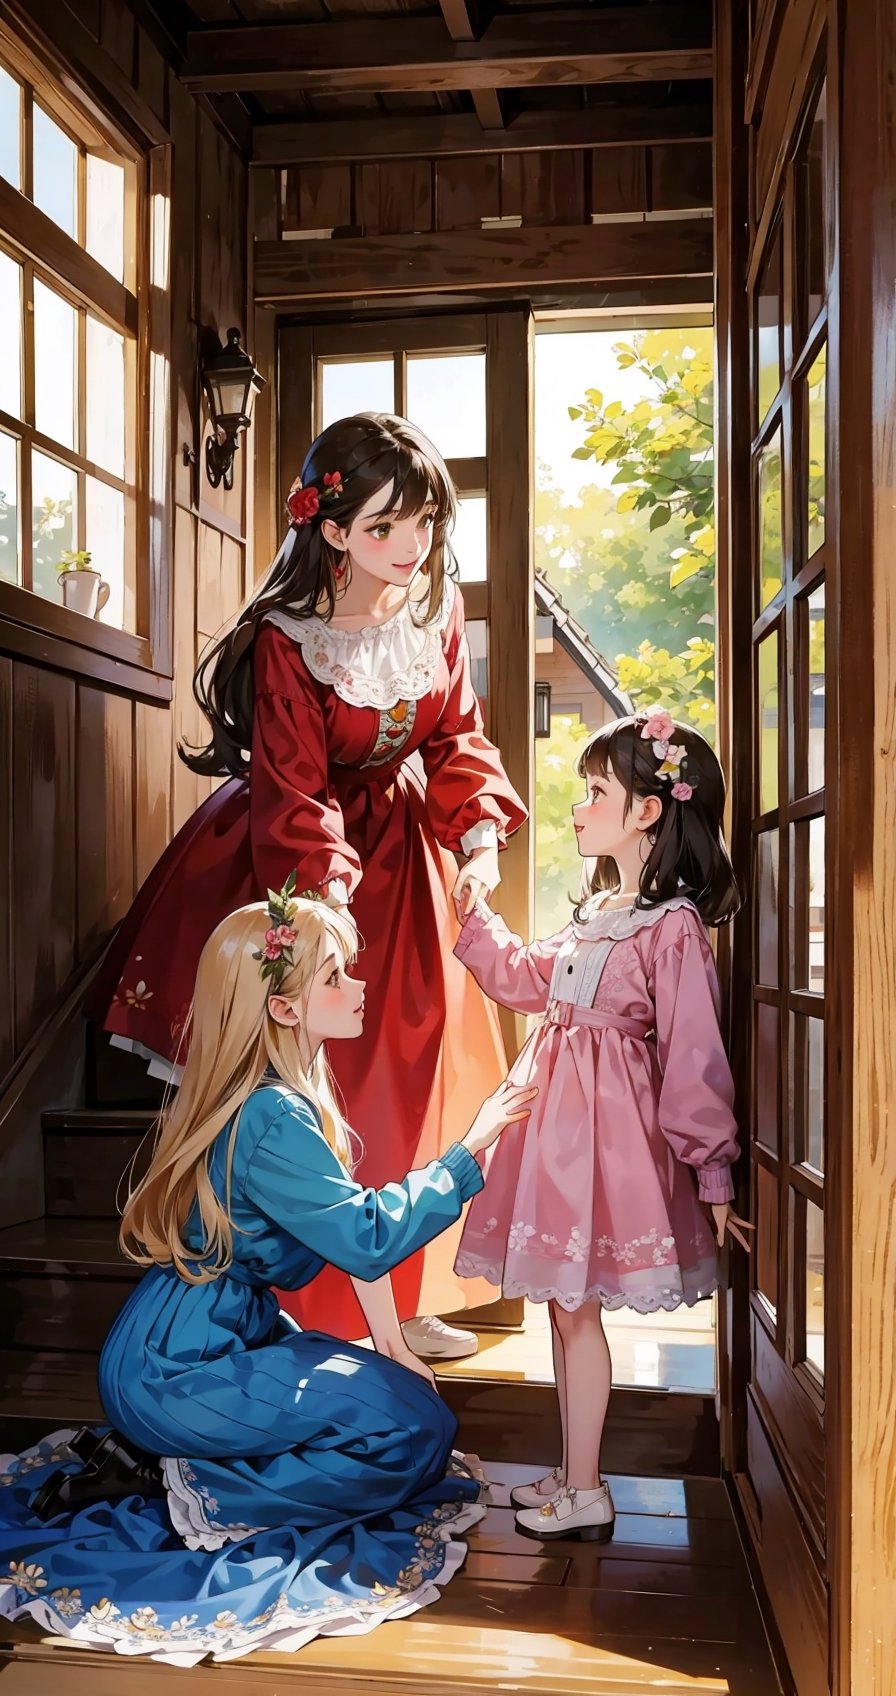 This image depicts two girls and a dog playing in front of a small wooden house in the forest. The girls are sisters and the dog is their pet. The girls are wearing colorful clothes. The older sister is wearing a red dress and a white lace cardigan. The younger sister is wearing a blue skirt and a yellow blouse. The dog has brown fur with white spots and a collar with a bell. 
BREAK 
The girls are making decorations with flowers, leaves and fruits on the stairs of the house. The older sister is making a flower crown for the younger sister. The younger sister is smiling and reaching out. The dog is playing with a branch under the stairs. The dog looks happy too. 
BREAK 
The house has round windows and doors and green moss on the roof. Inside the house, there are books, toys and paintings. Around the house, there are various types of flowers and trees. The flowers are red, pink, white, purple and other colors. The trees are tall and lush. The sky is blue with white clouds. The sunlight is shining through the trees. 
BREAK 
This image expresses a happy day of the girls and the dog living in harmony with nature. The image is bright and colorful and has a warm feeling. The image gives the viewer a sense of healing and peace. 